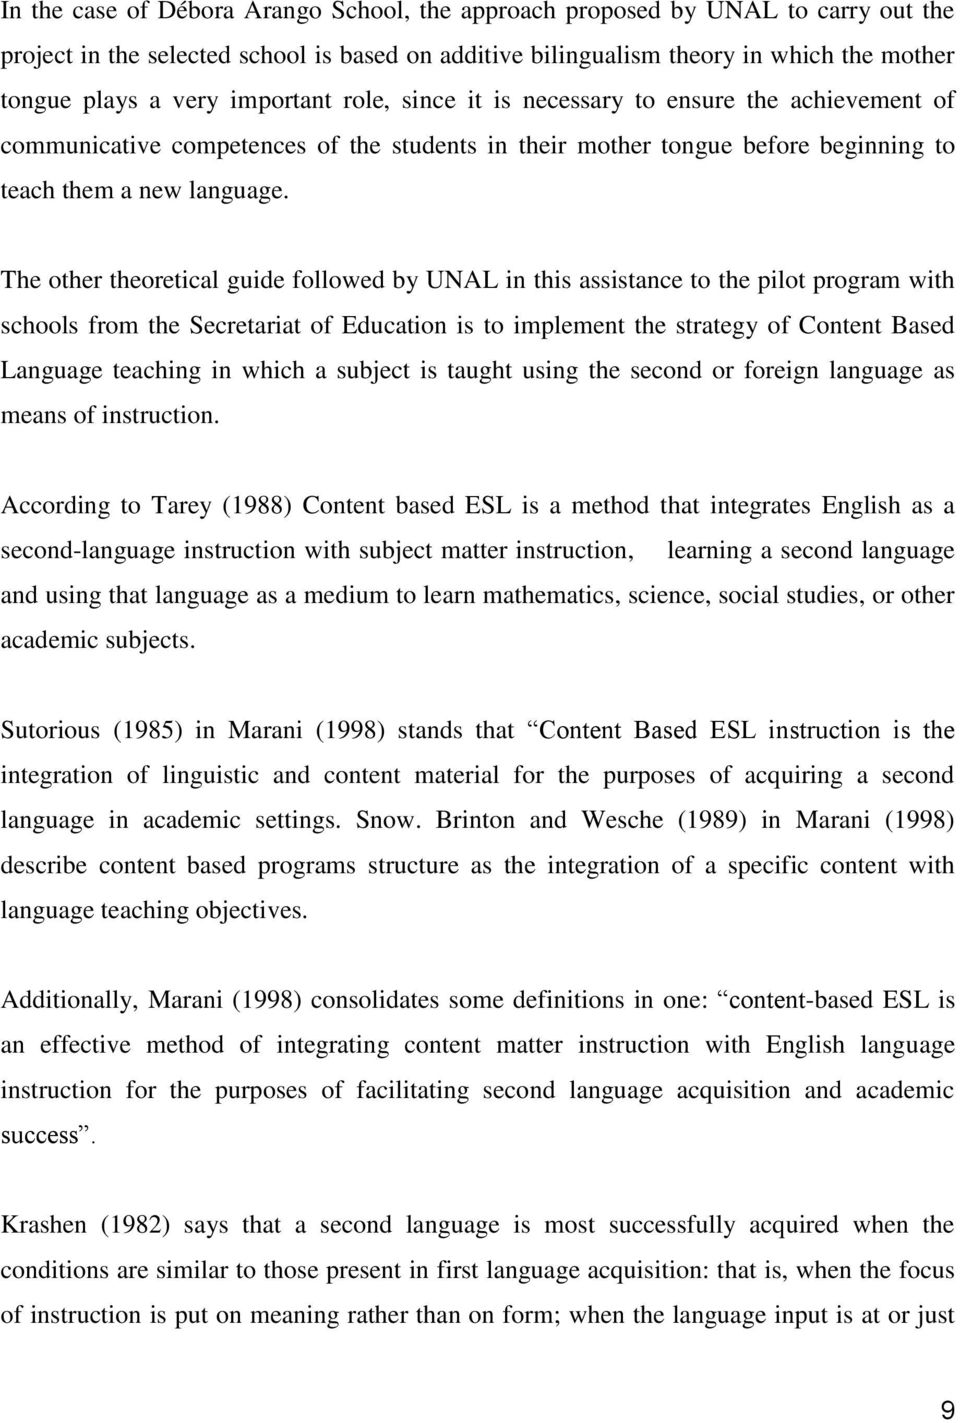 The other theoretical guide followed by UNAL in this assistance to the pilot program with schools from the Secretariat of Education is to implement the strategy of Content Based Language teaching in